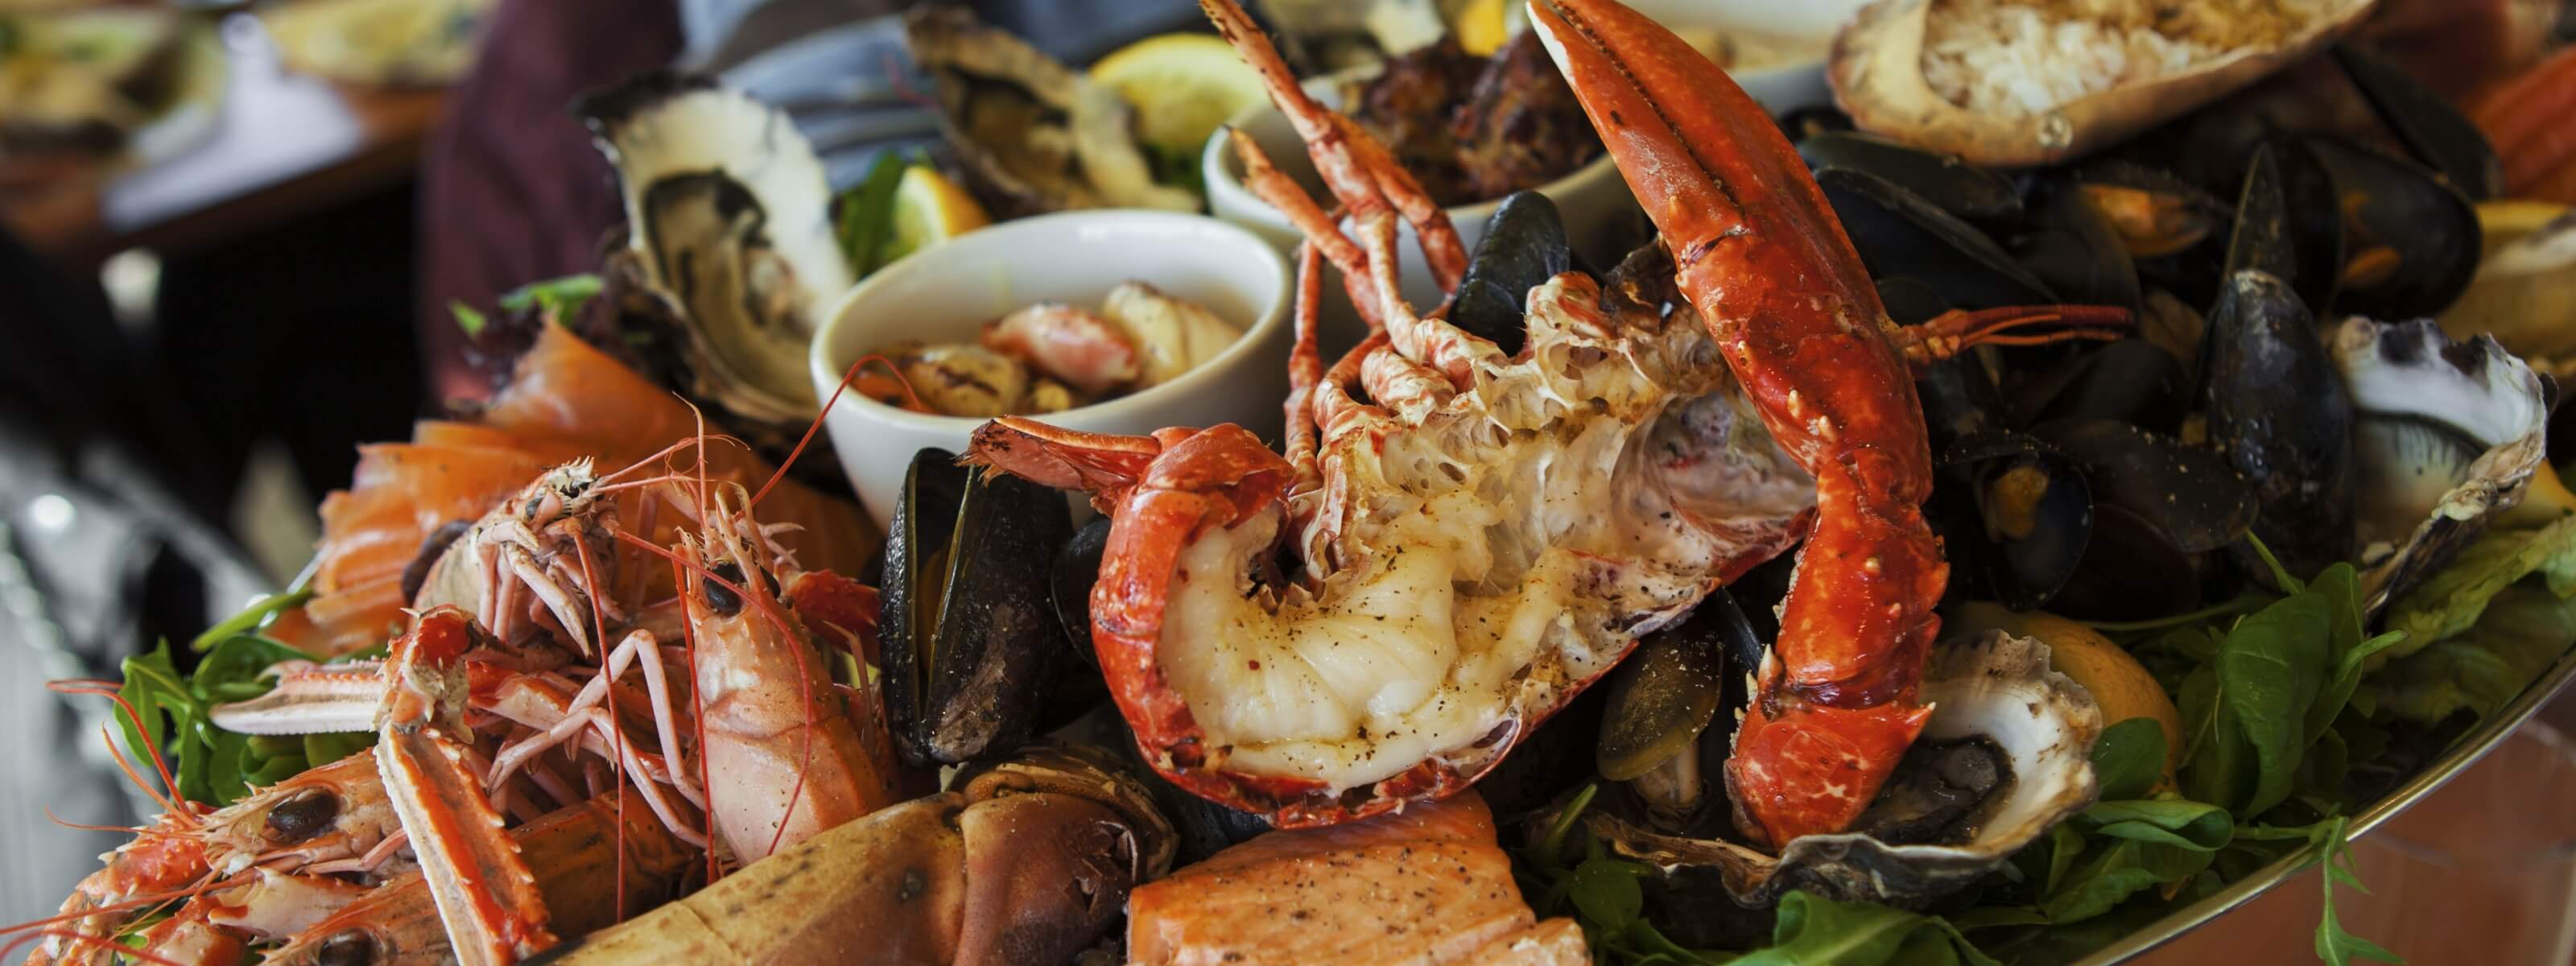 lobster, crabs, moreton bay bug and more seafood from steve costi seafood